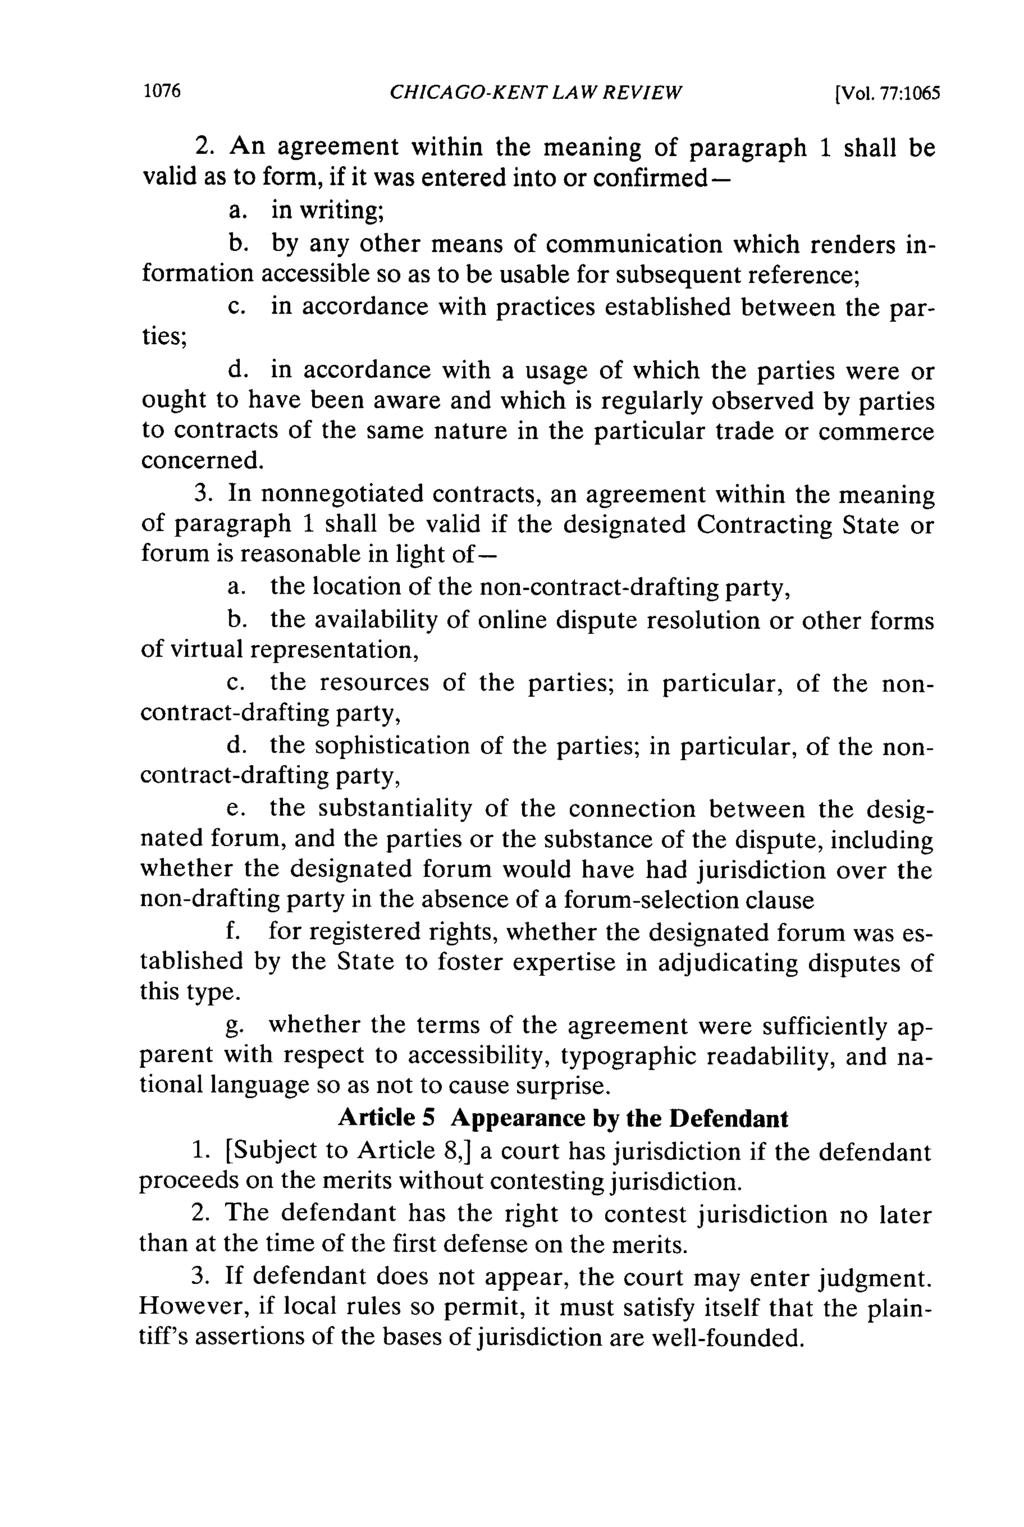 CHICA GO-KENT LAW REVIEW [Vol. 77:1065 2. An agreement within the meaning of paragraph 1 shall be valid as to form, if it was entered into or confirmed - a. in writing; b.